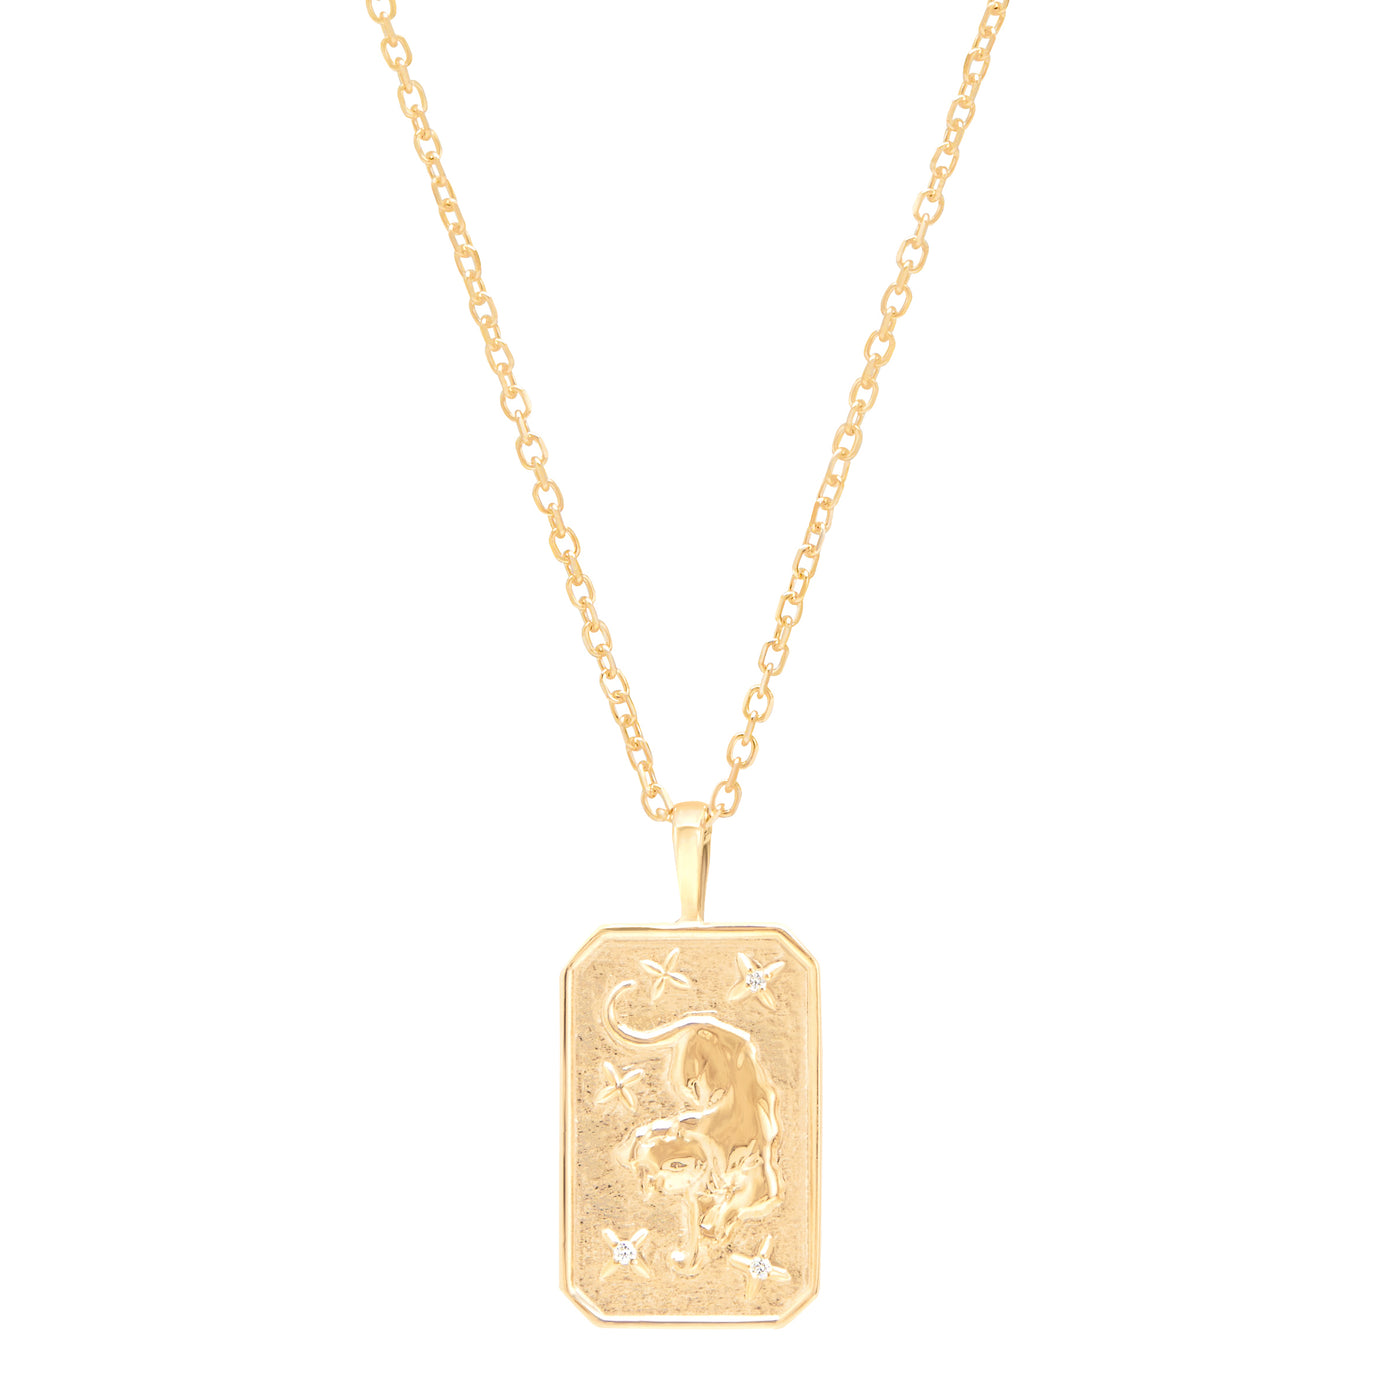 Tiger pendent yellow gold with cable chain on white background with diamond details